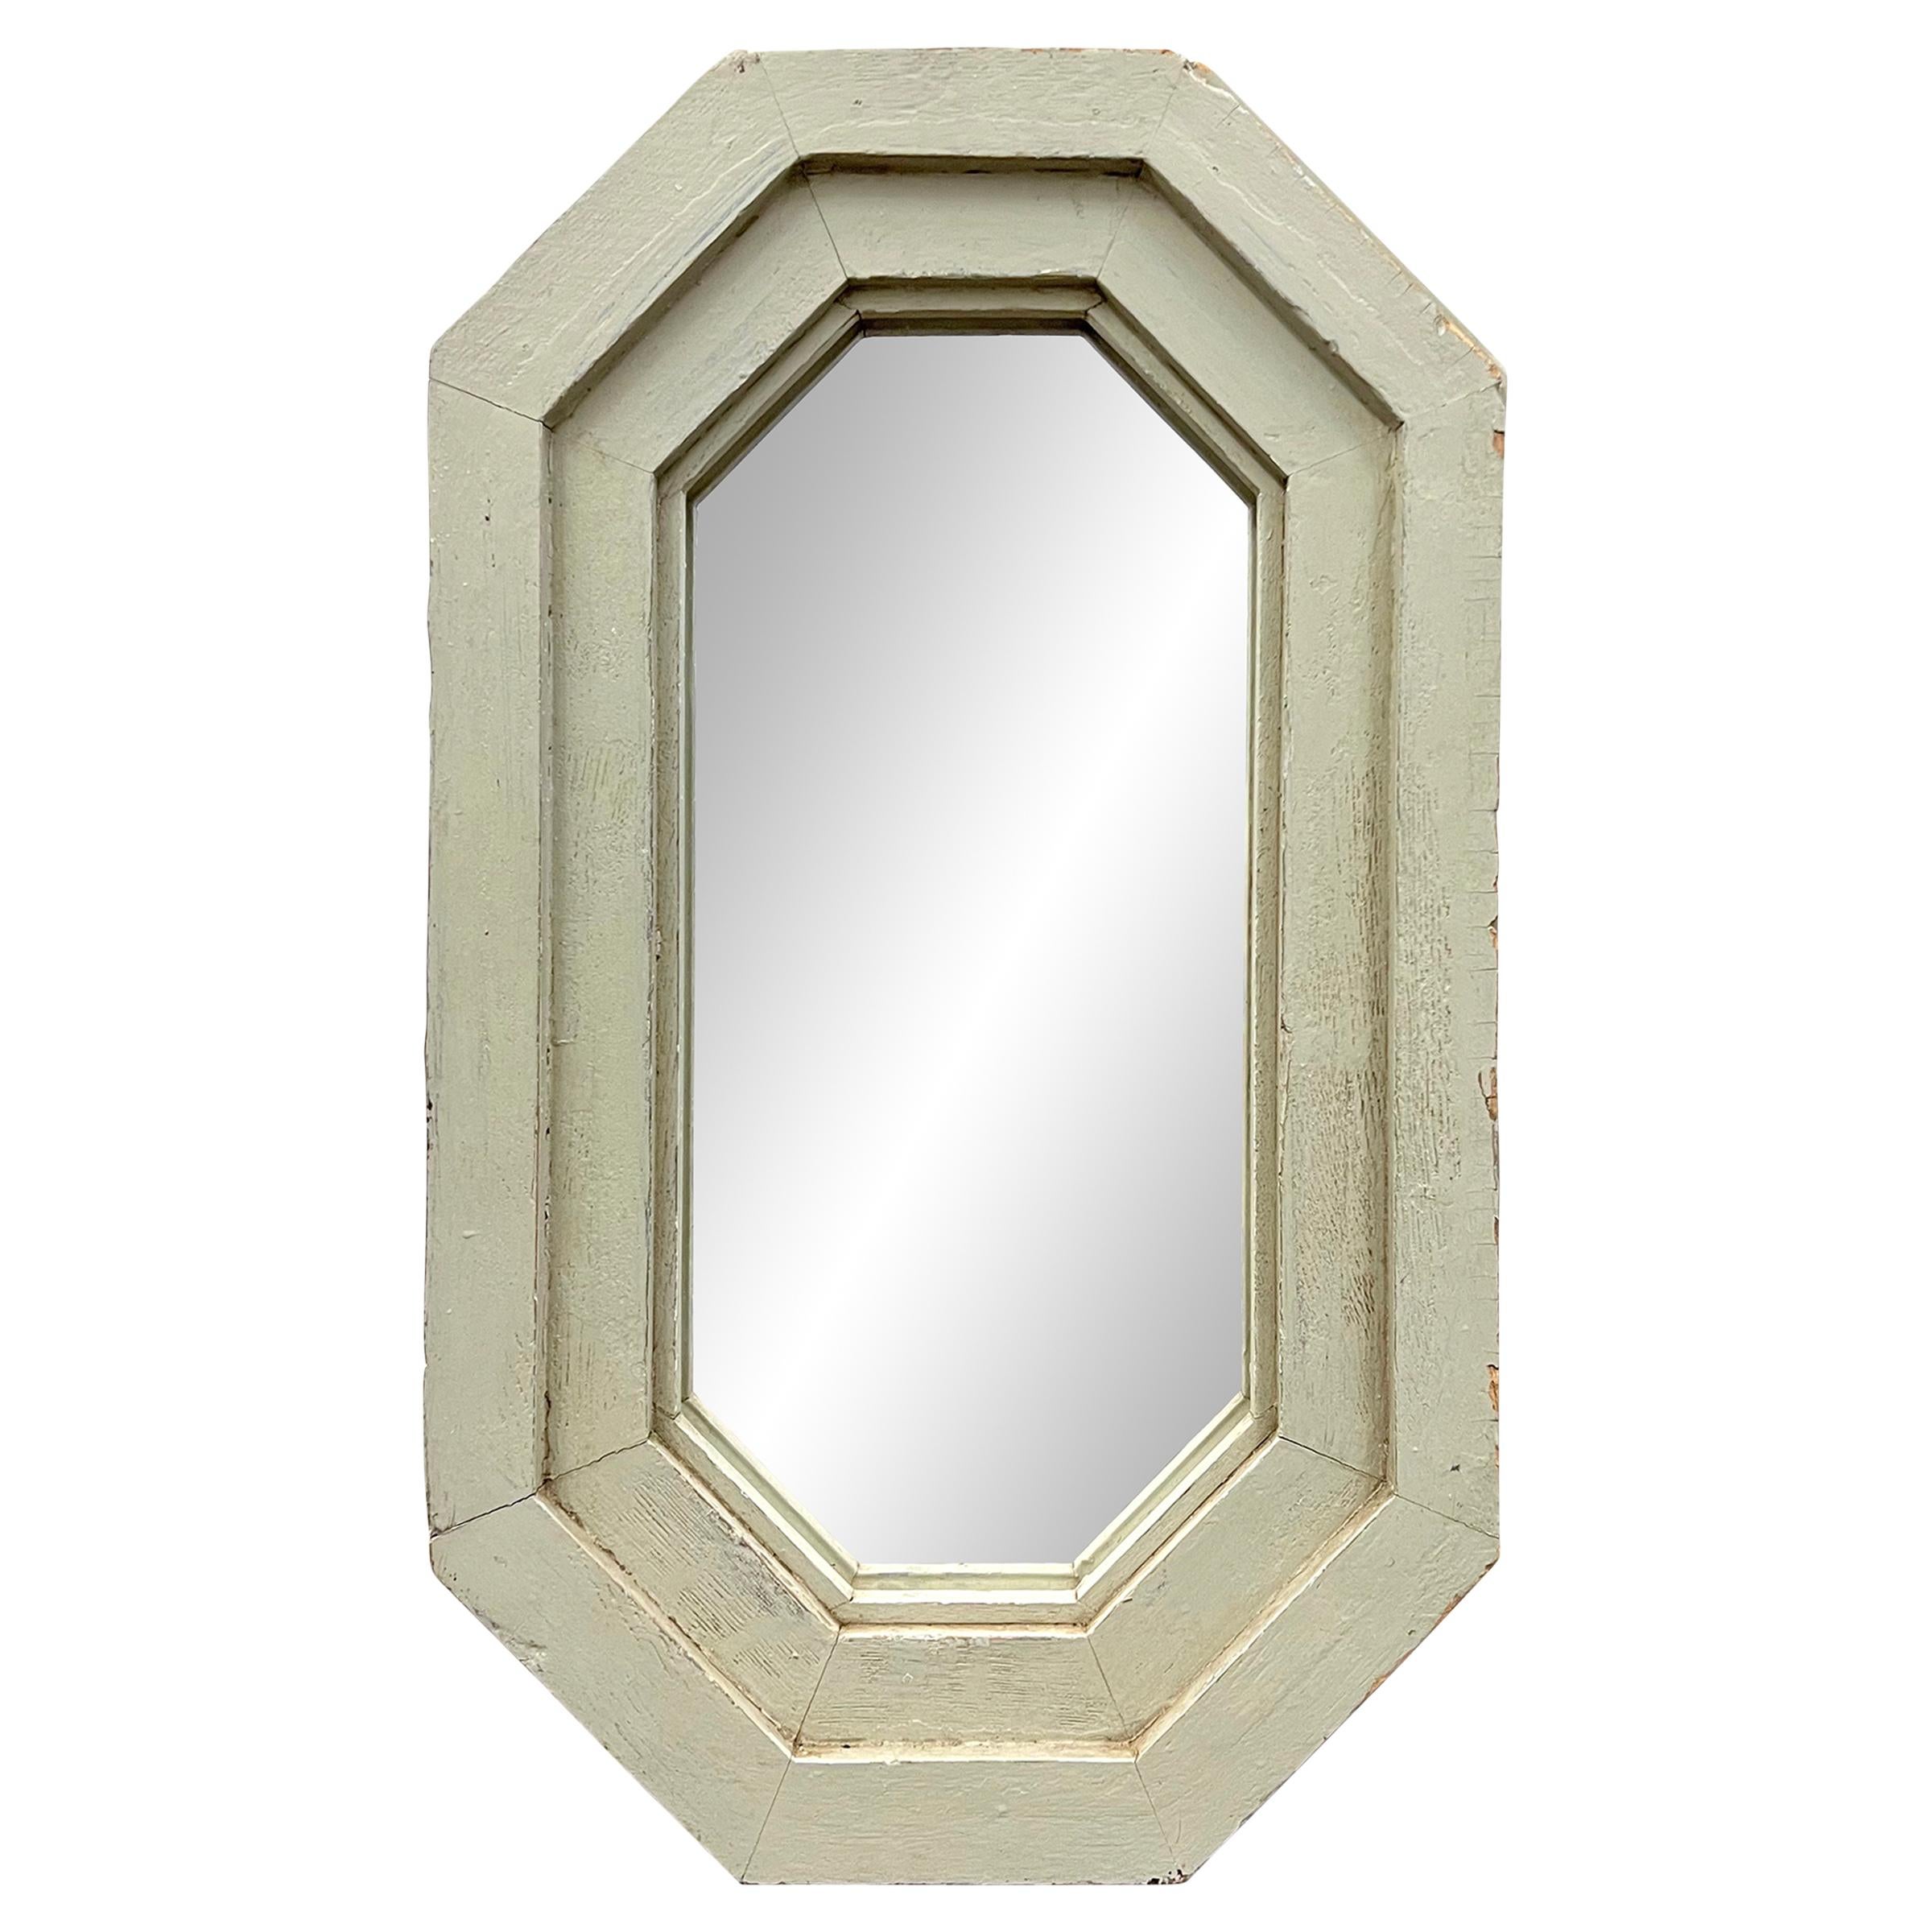 Rustic Pair of 20th Century American Octagonal Framed Mirrors